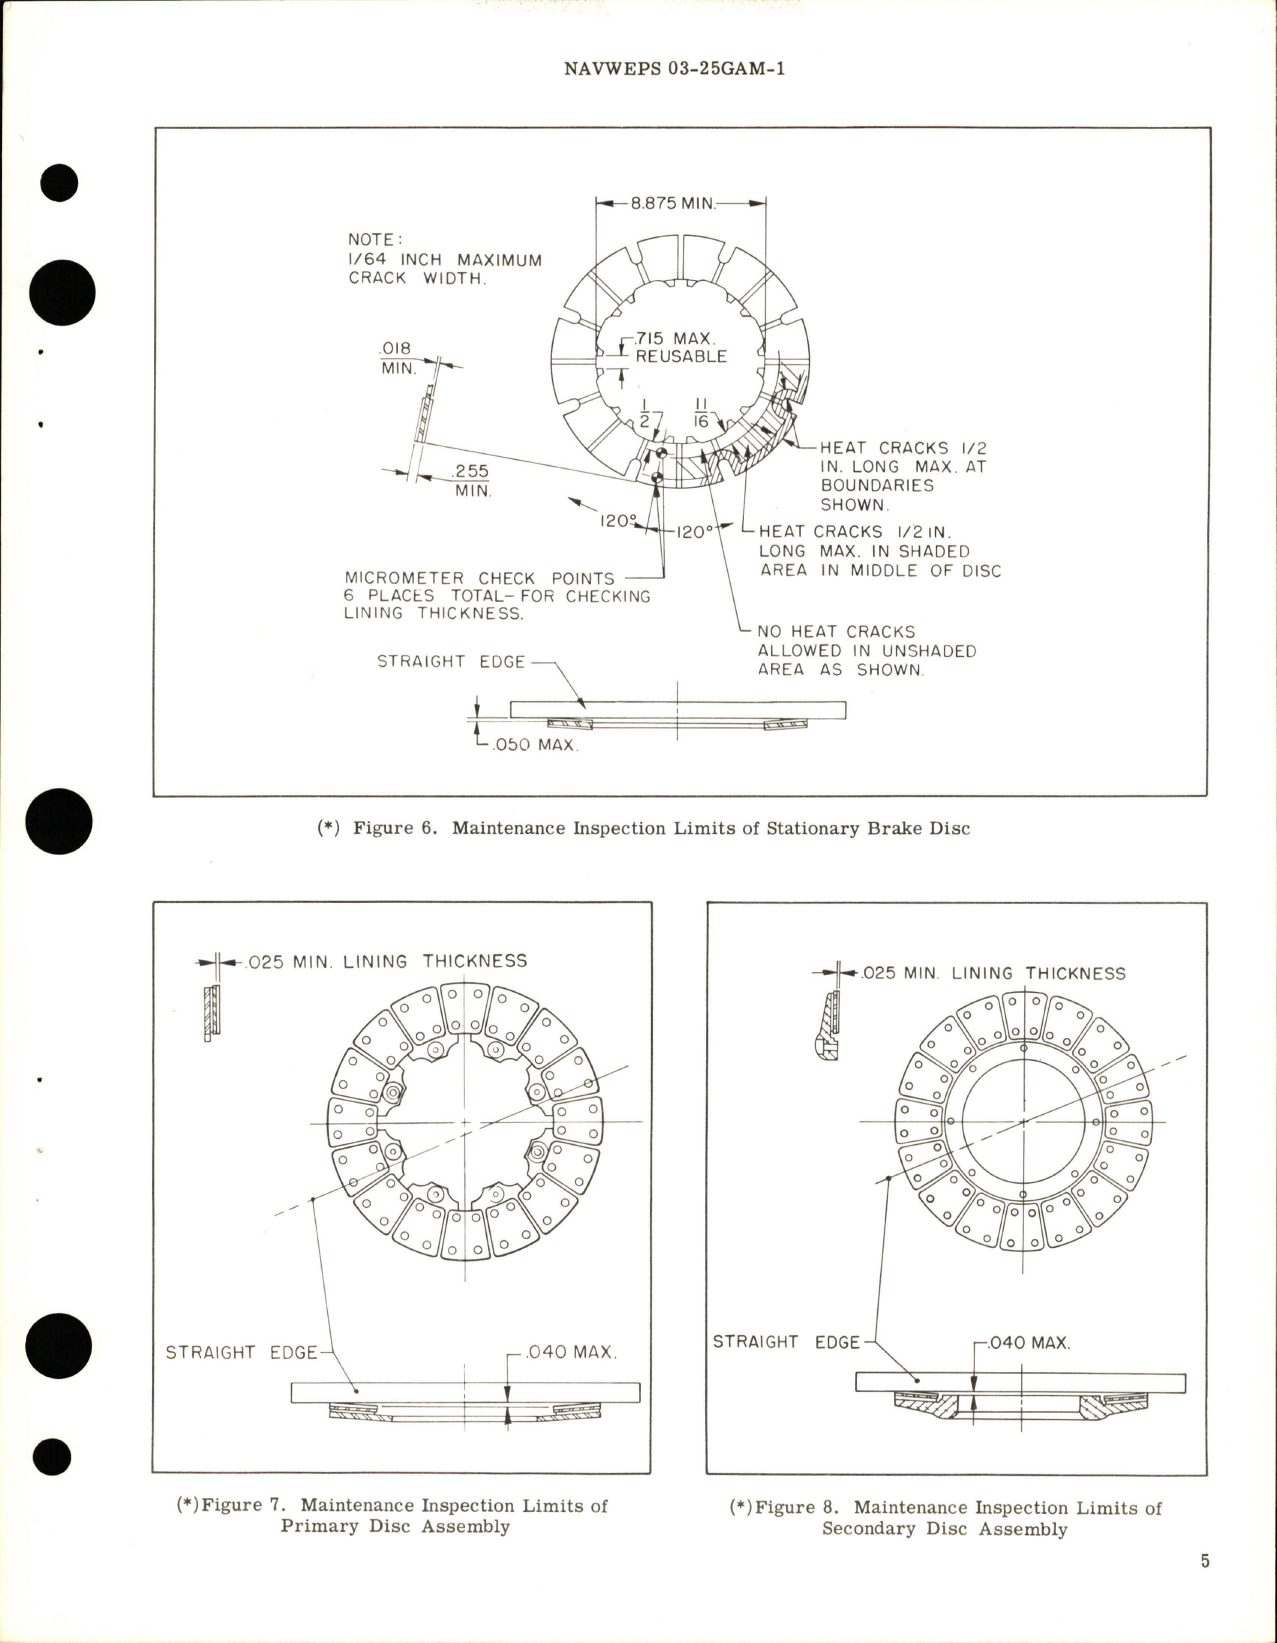 Sample page 5 from AirCorps Library document: Overhaul and Maintenance Instructions with Parts Breakdown for 5-Rotor Brake Assembly - 13 7/8 x 9 1/8 - Part AA-313314-2